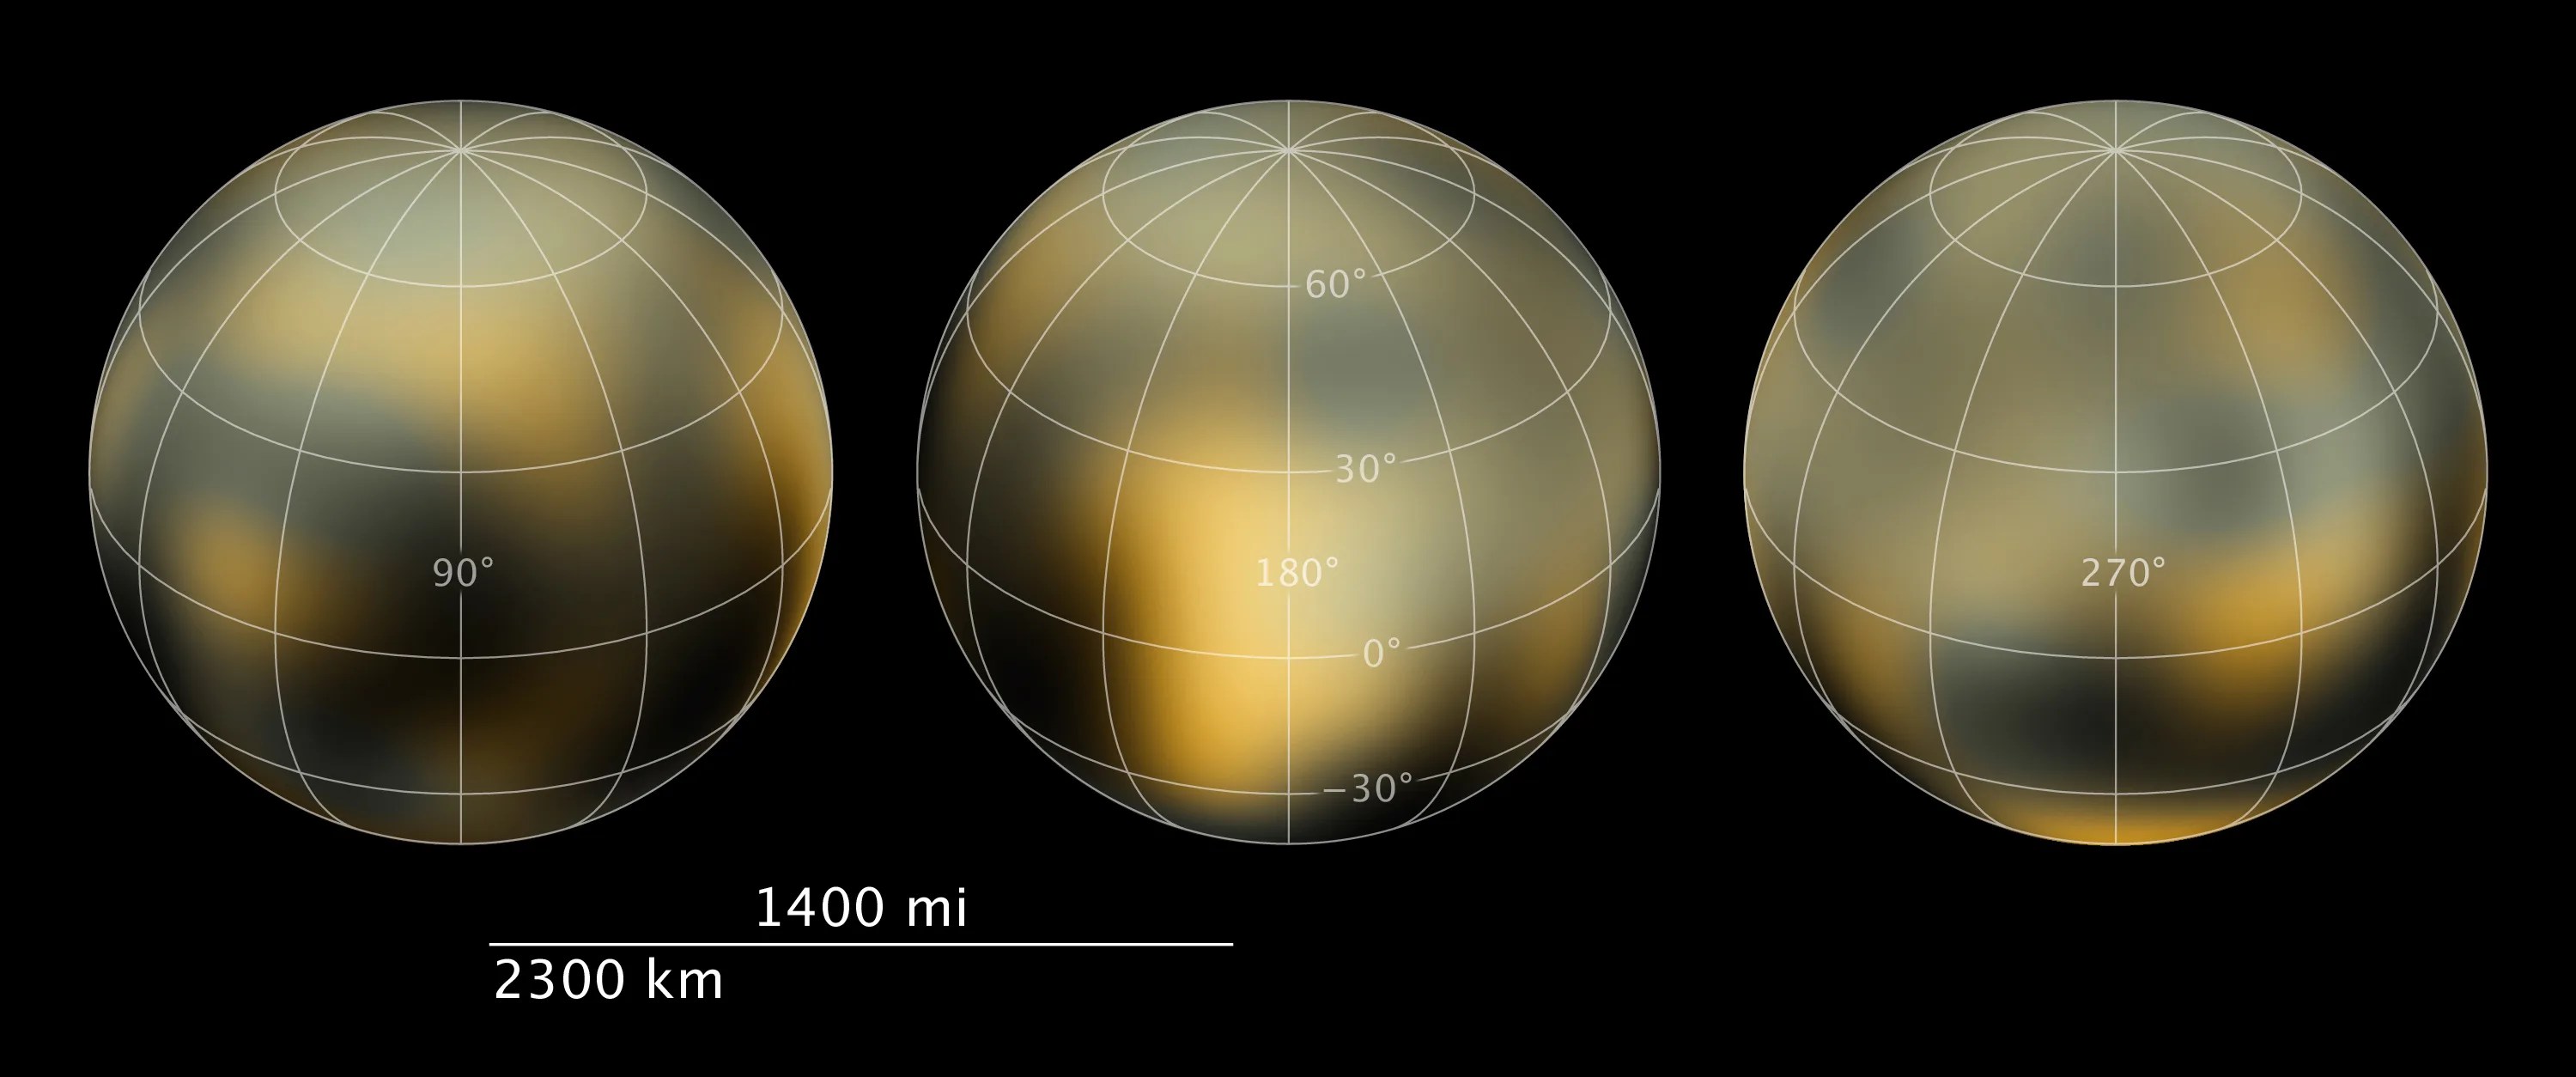 Hubble observations of Pluto, mapped over spheres